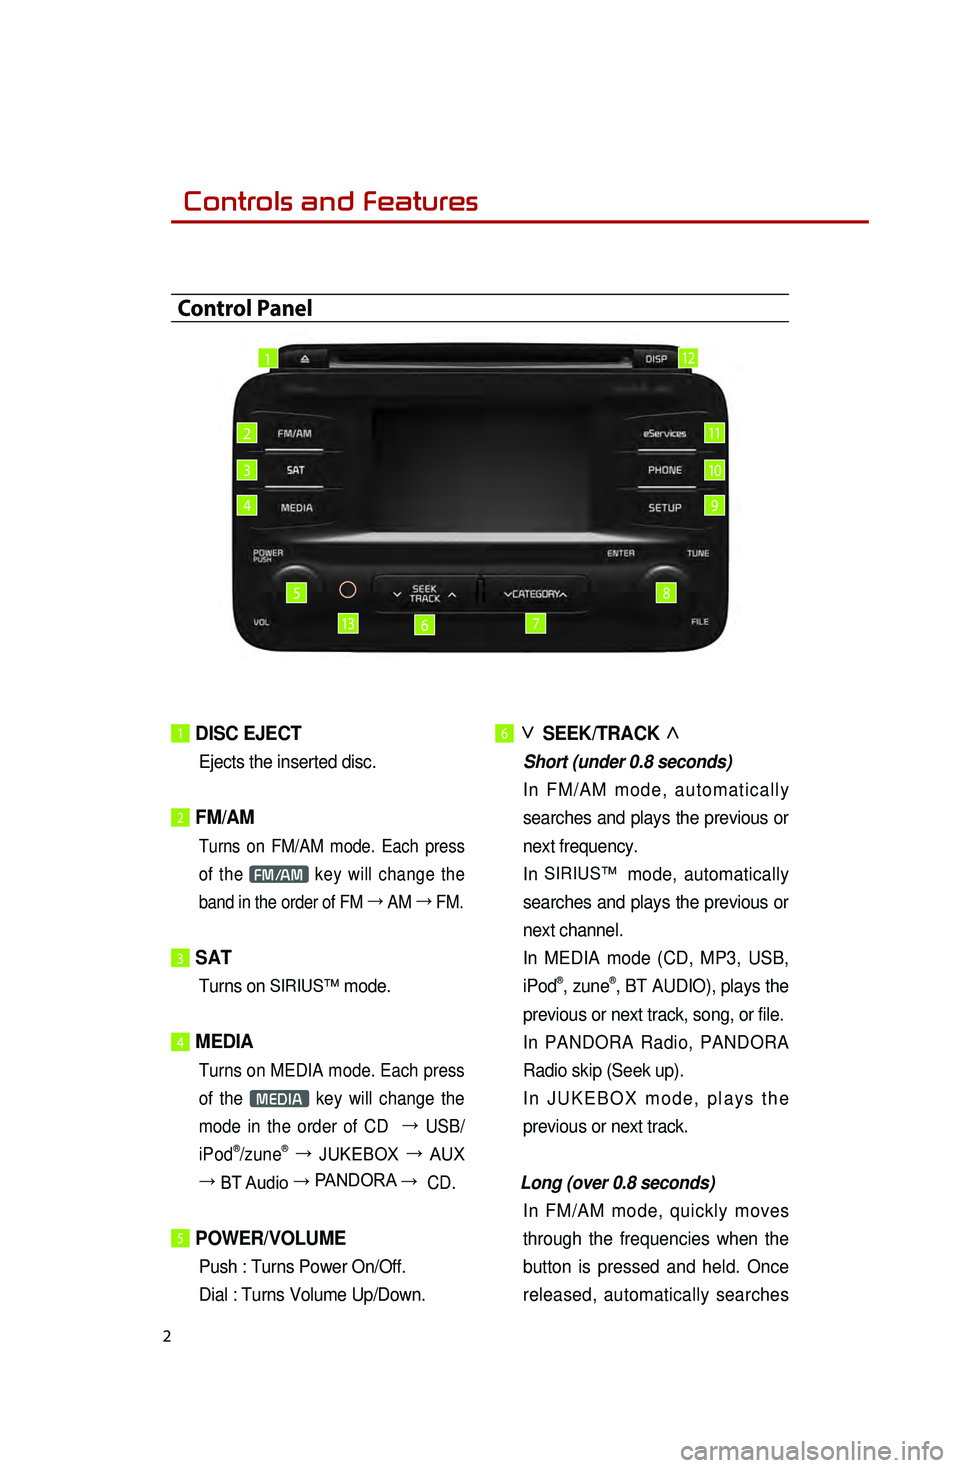 KIA OPTIMA HYBRID 2016  Quick Reference Guide 2
1 DISC  EJECT
Ejects the inserted disc.
 
2 FM/AM
 Turns on FM/AM mode. Each press 
of the 
FM/AM key will change the 
band in the order of FM  →
 AM  →
 FM.
3 SAT
Turns on SIRIUS™  mode. 
4 M